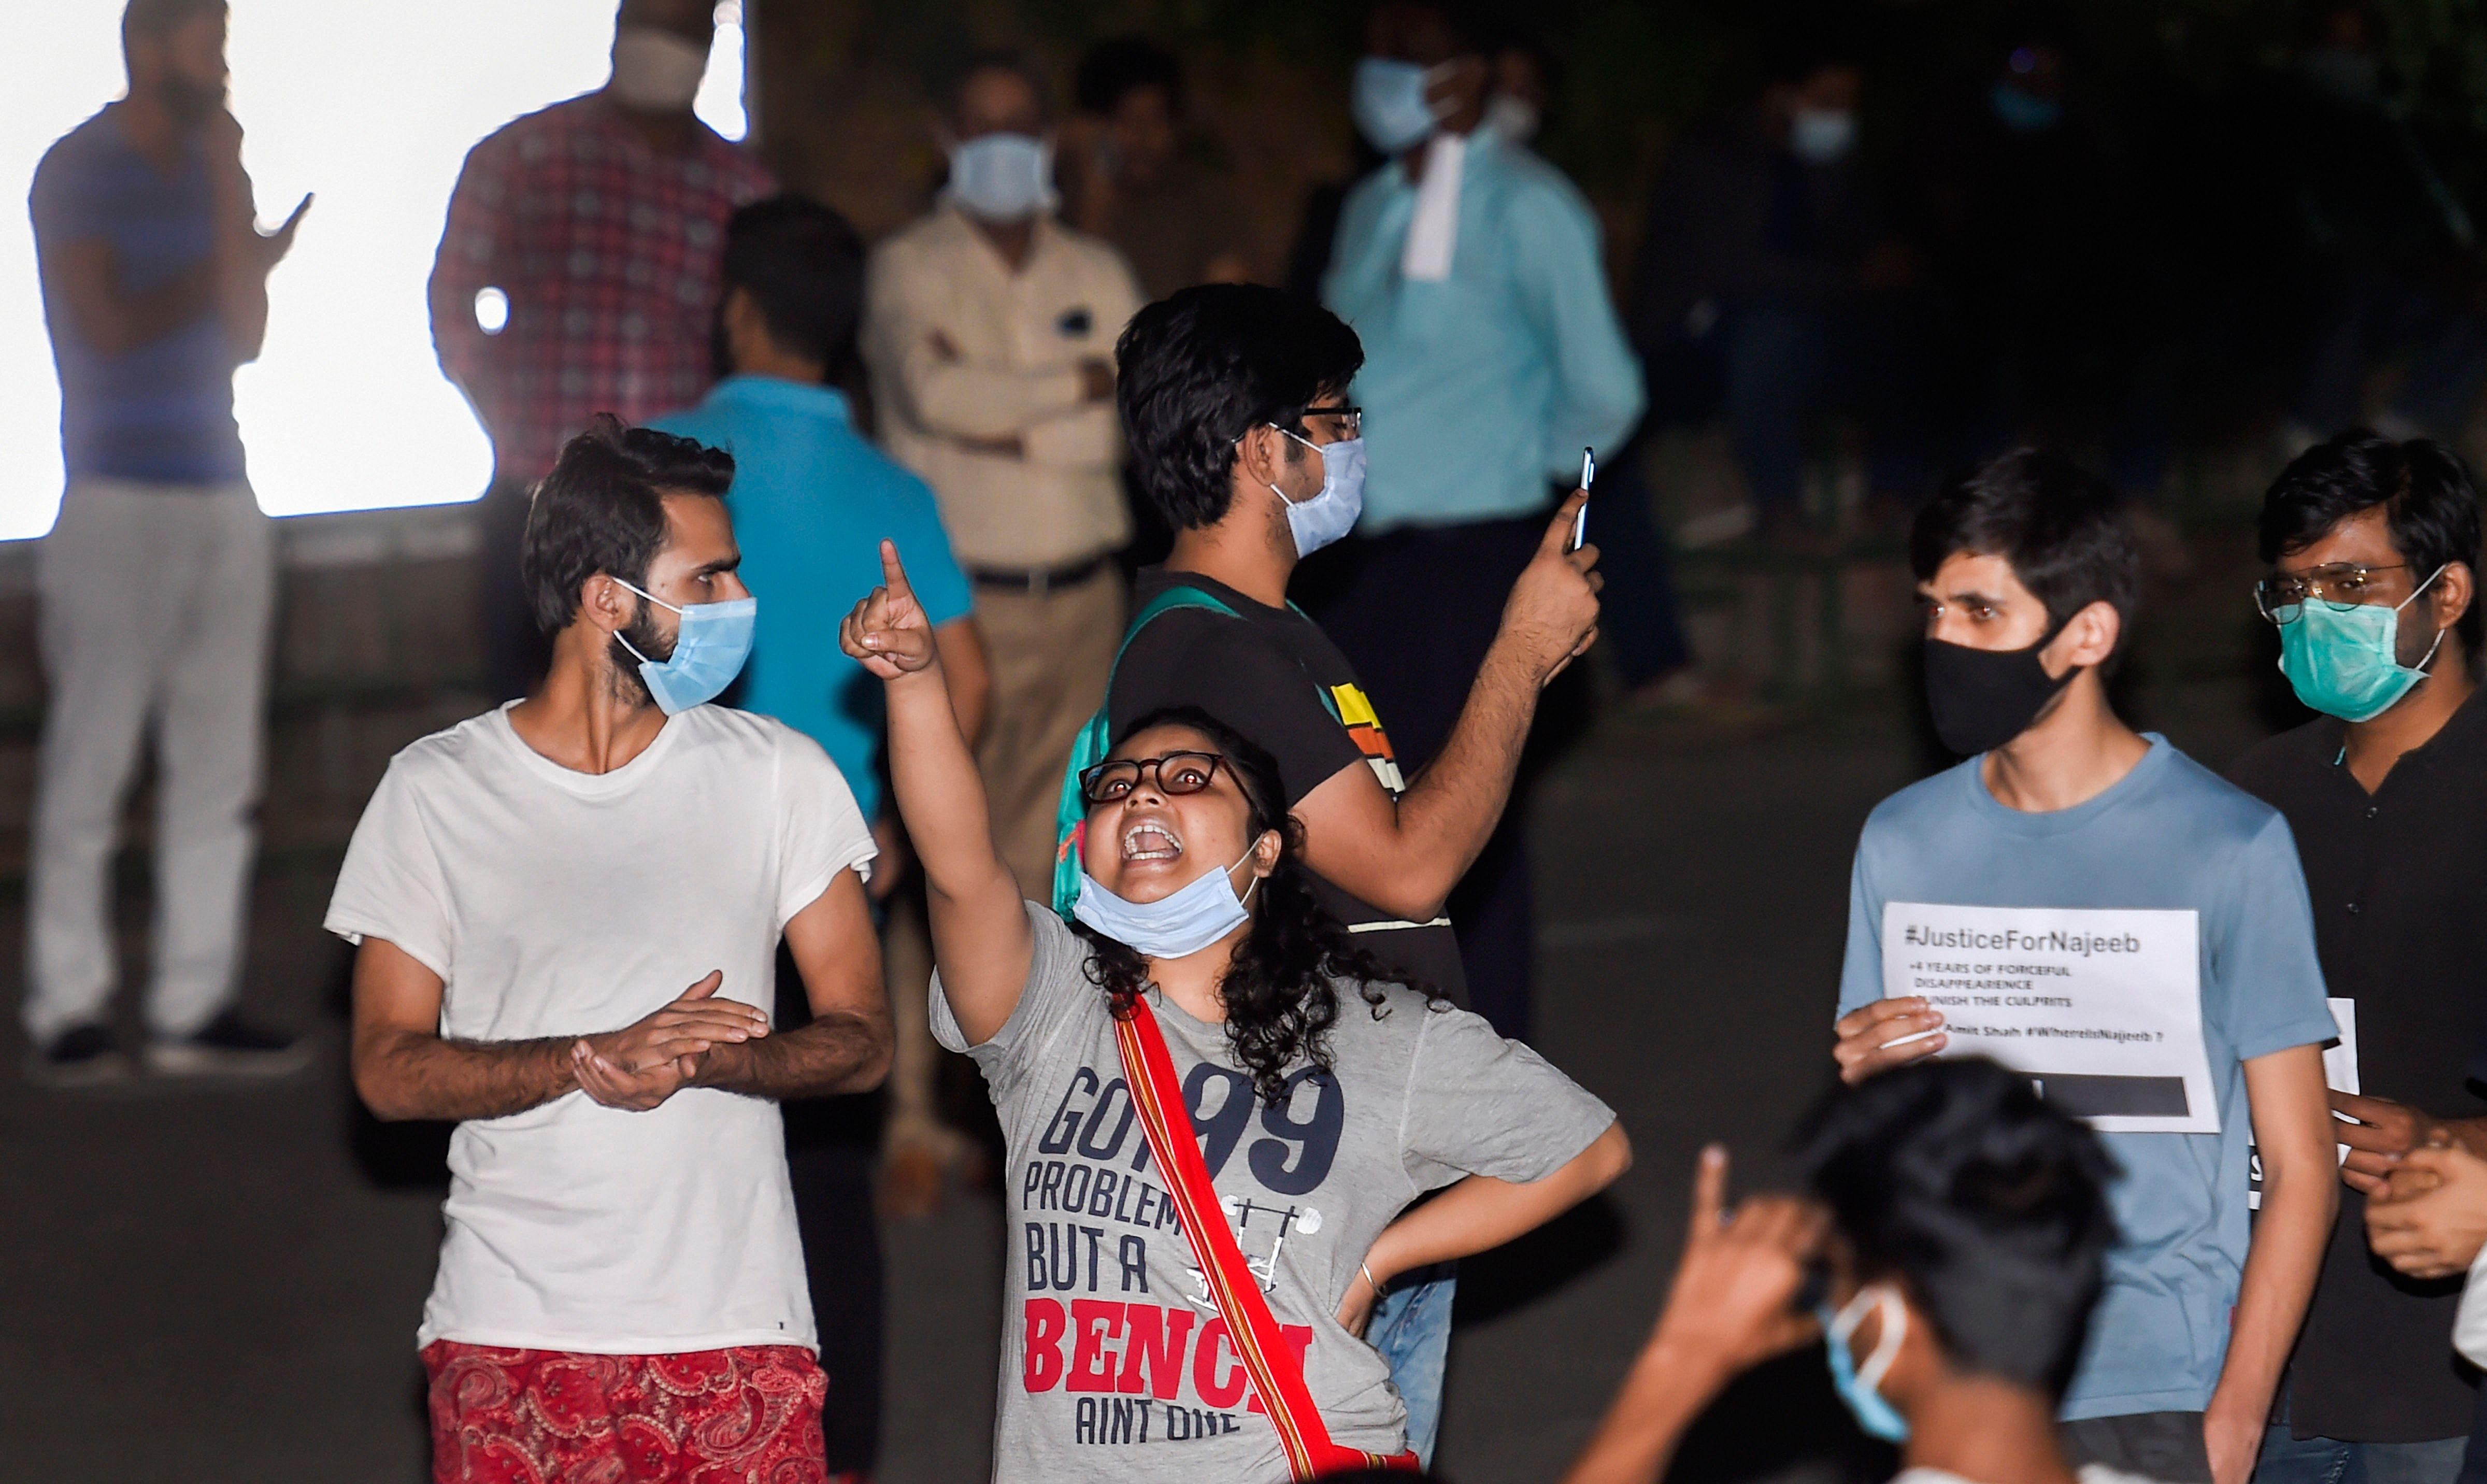 Members of JNUSU during a protest over the disappearance of a student Najeeb Ahmed, at JNU campus in New Delhi, Thursday, Oct. 15, 2020. Today marks the completion of four years of Ahmed's disappearance. Credit: PTI Photo